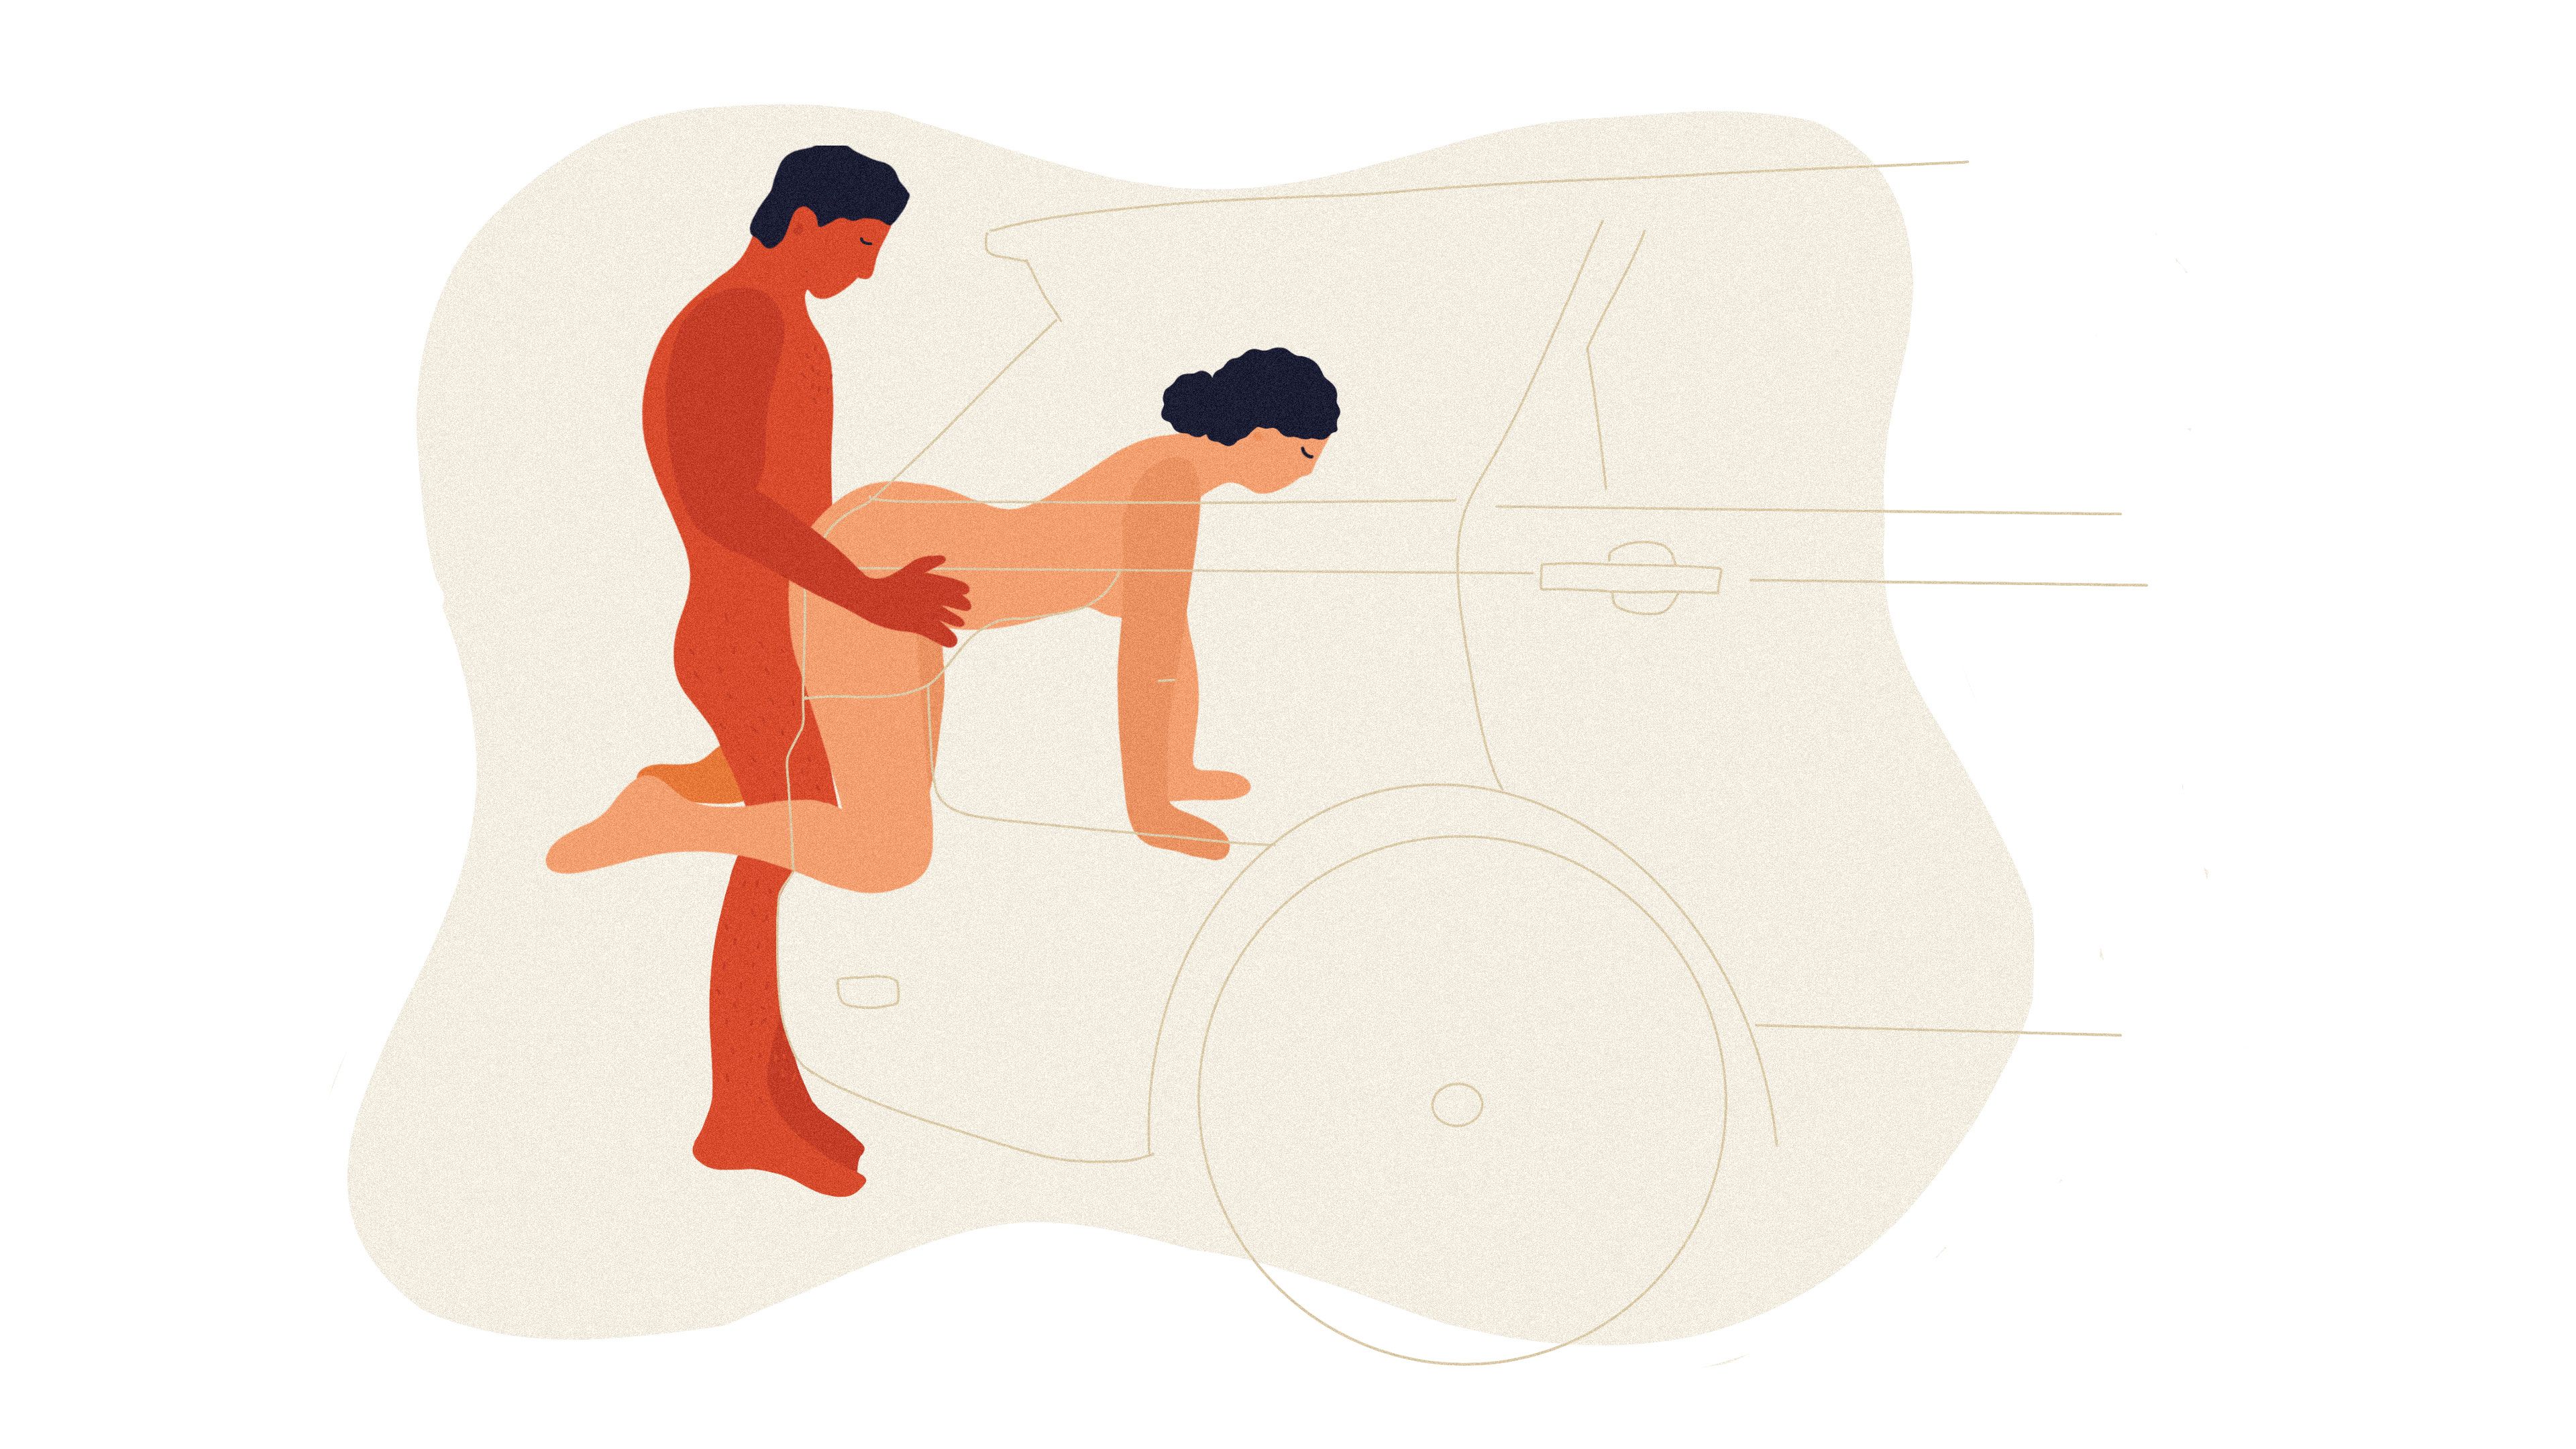 The 10 Best Car Sex Positions picture